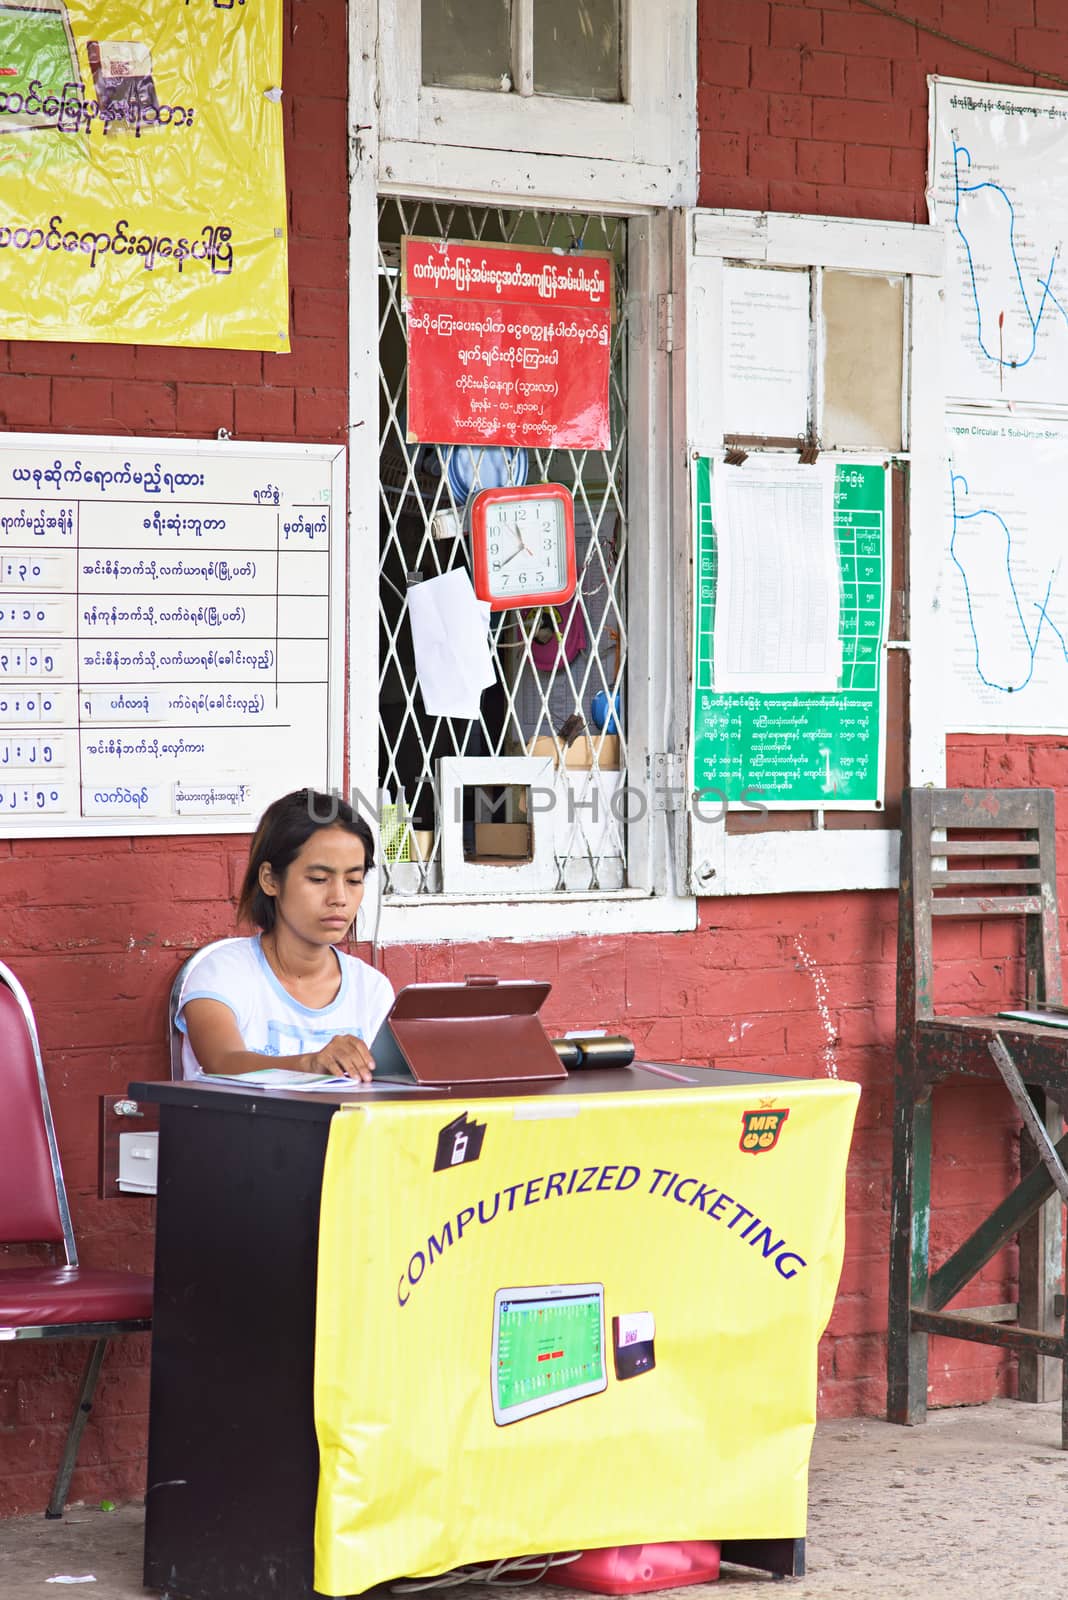 Yangon, Myanmar - July 5, 2015: Myanmar’s old fashioned but popular railway system has introduced computerized ticketing in Yangon, utilizing tablet computers to issue tickets.